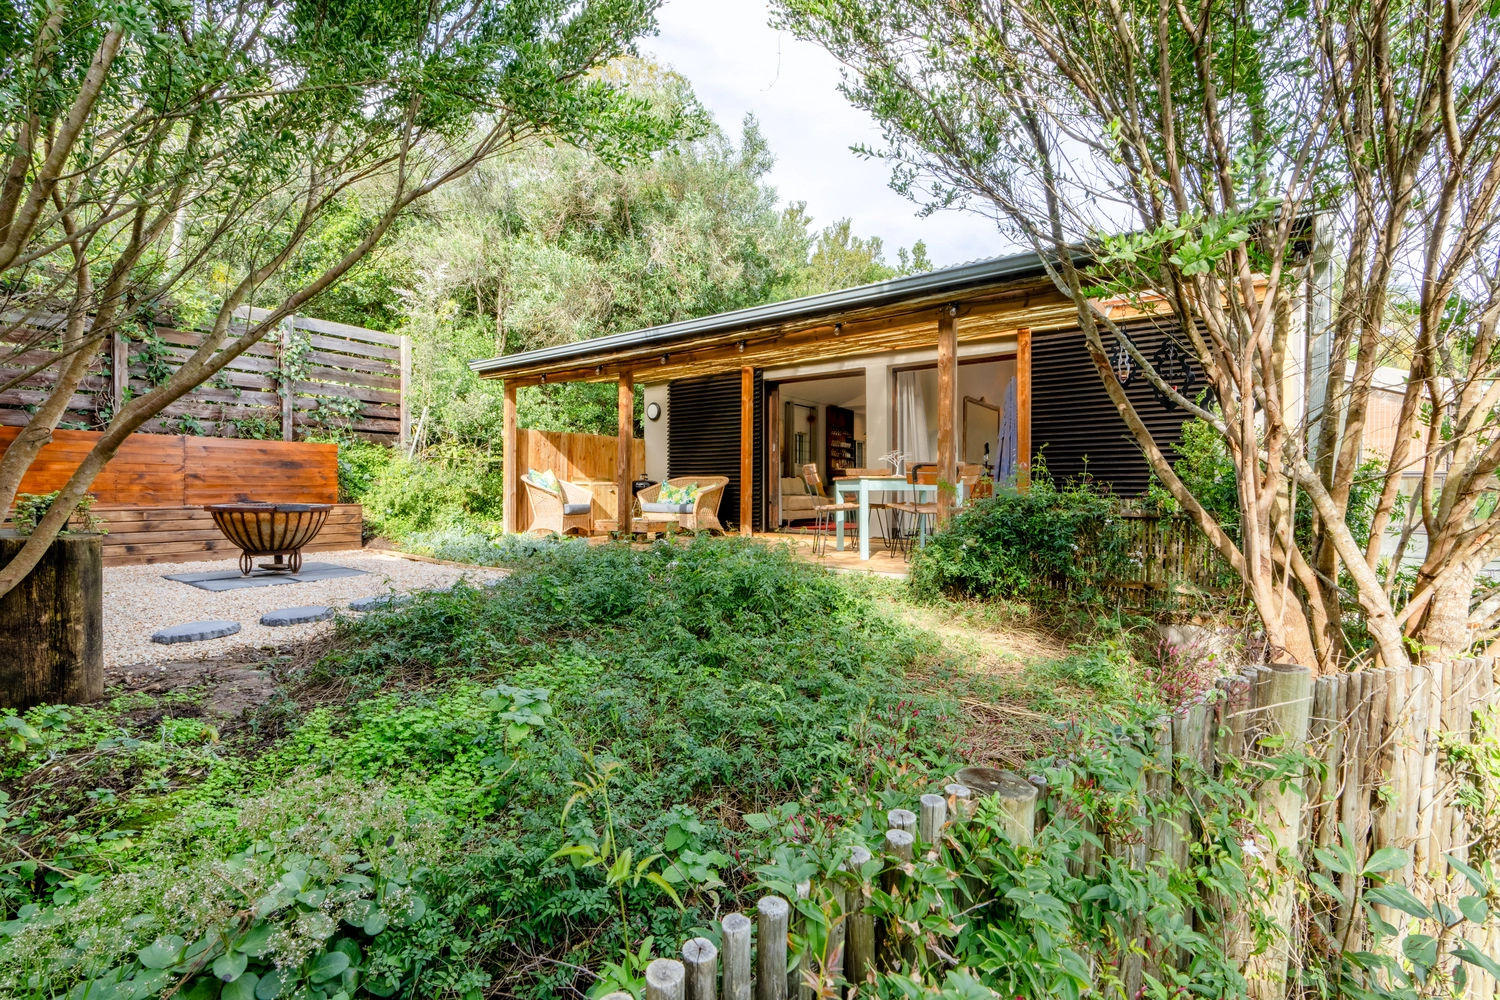 Treebia, load shedding free getaway surrounded by indigenous forest in the heart of Plettenberg Bay